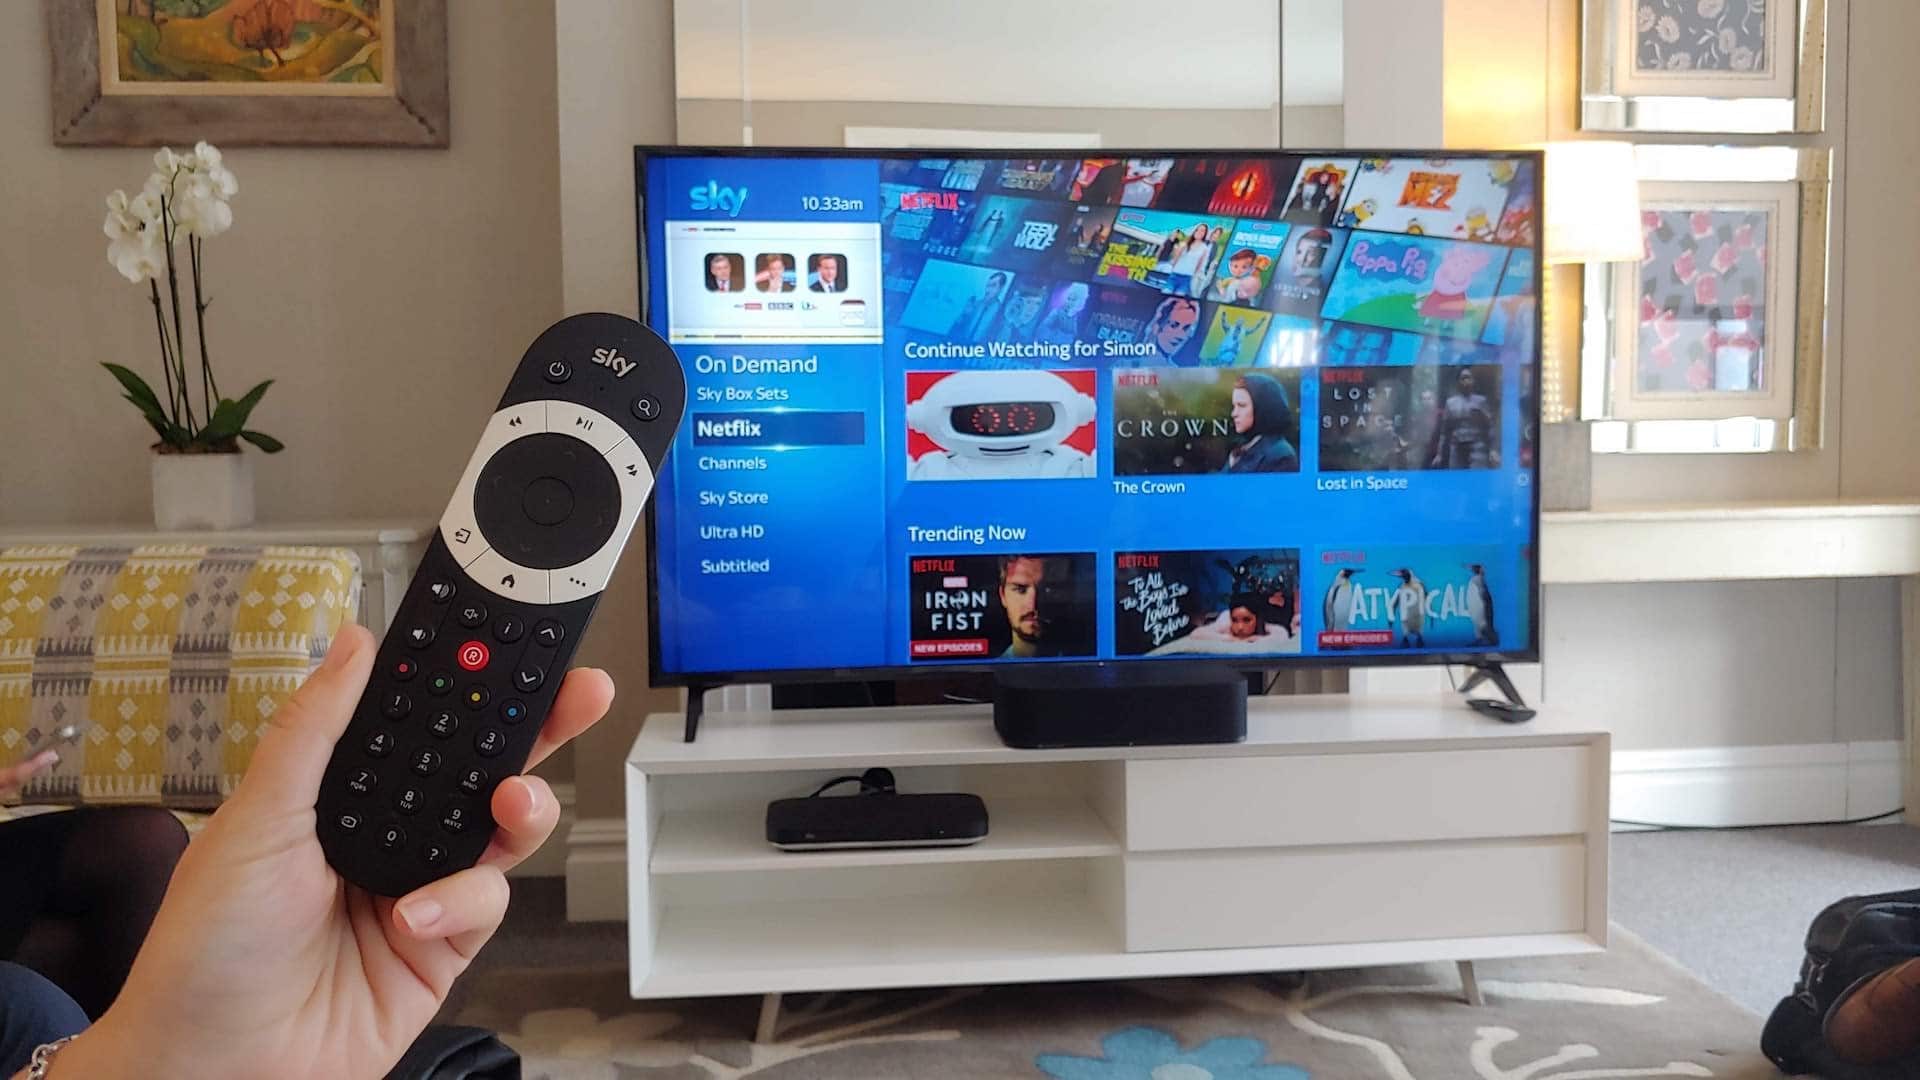 Where is The Reset Button on Sky Q Hub? [Quick Answer]